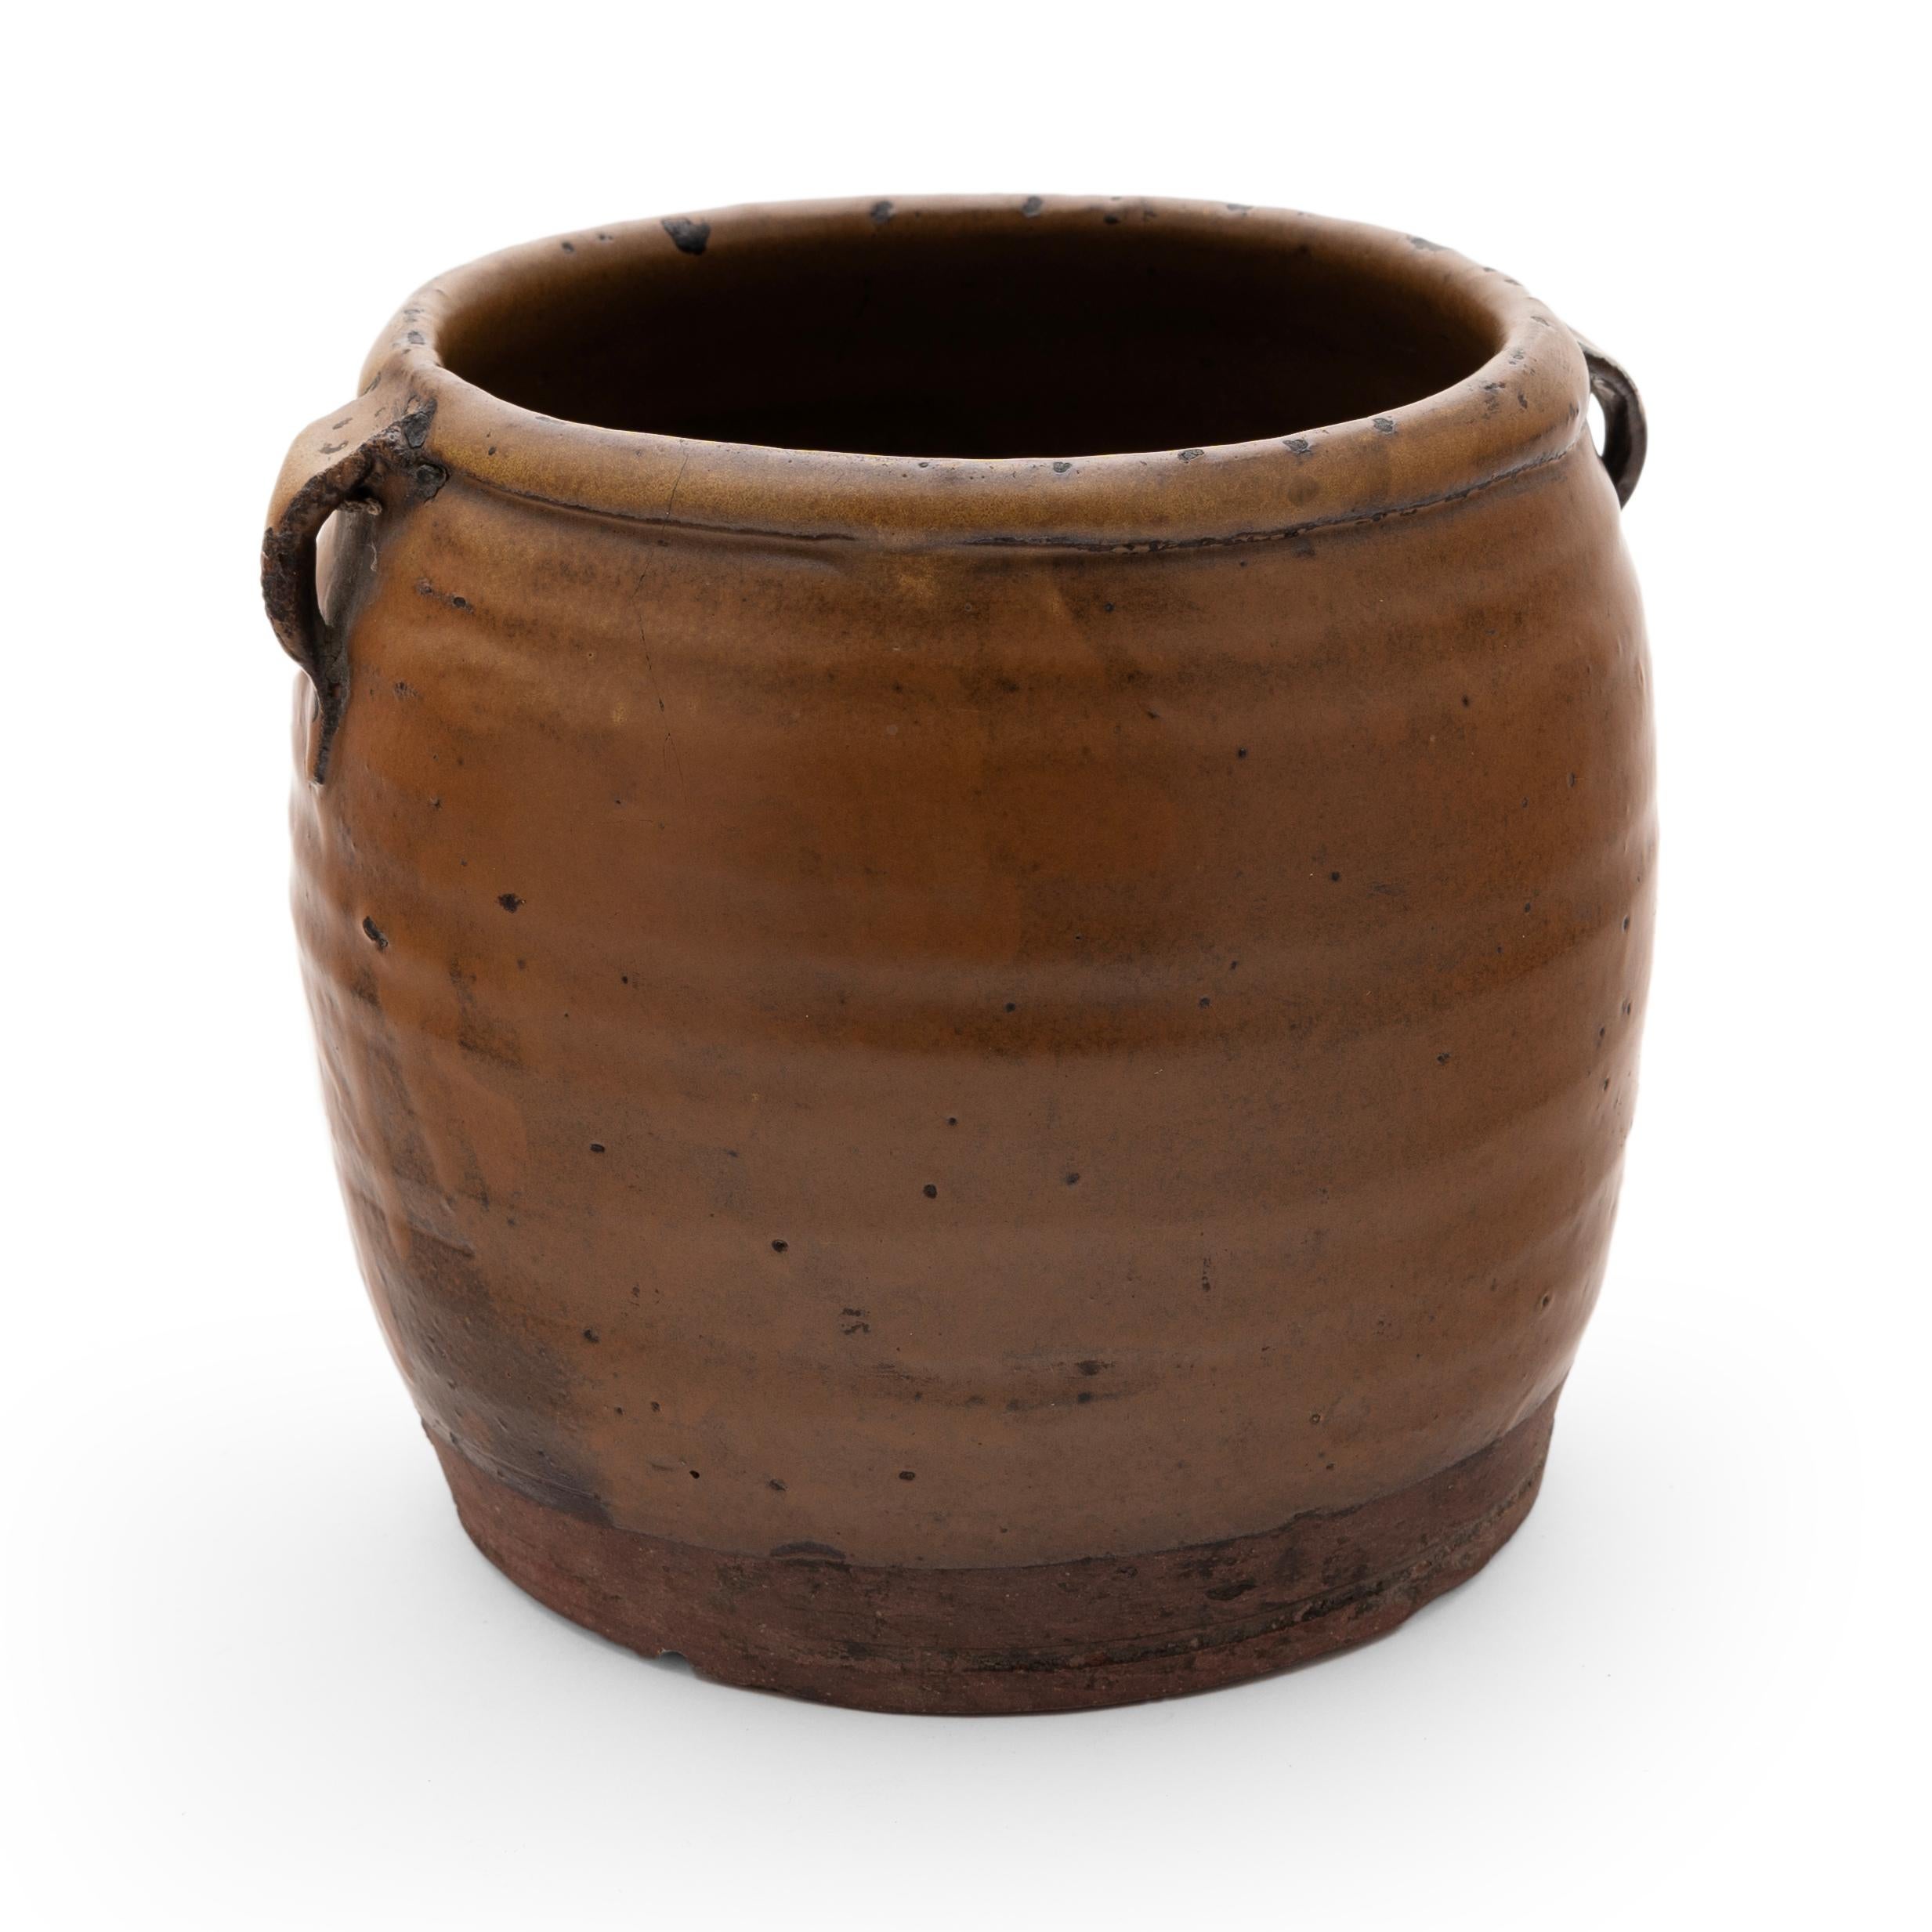 A thick, light brown glaze coats the stout body of this early 20th century terra cotta kitchen jar. As evidenced by the glazed interior, this wide-mouth jar was once used daily in a Provincial Chinese kitchen for fermenting foods and condiments. The